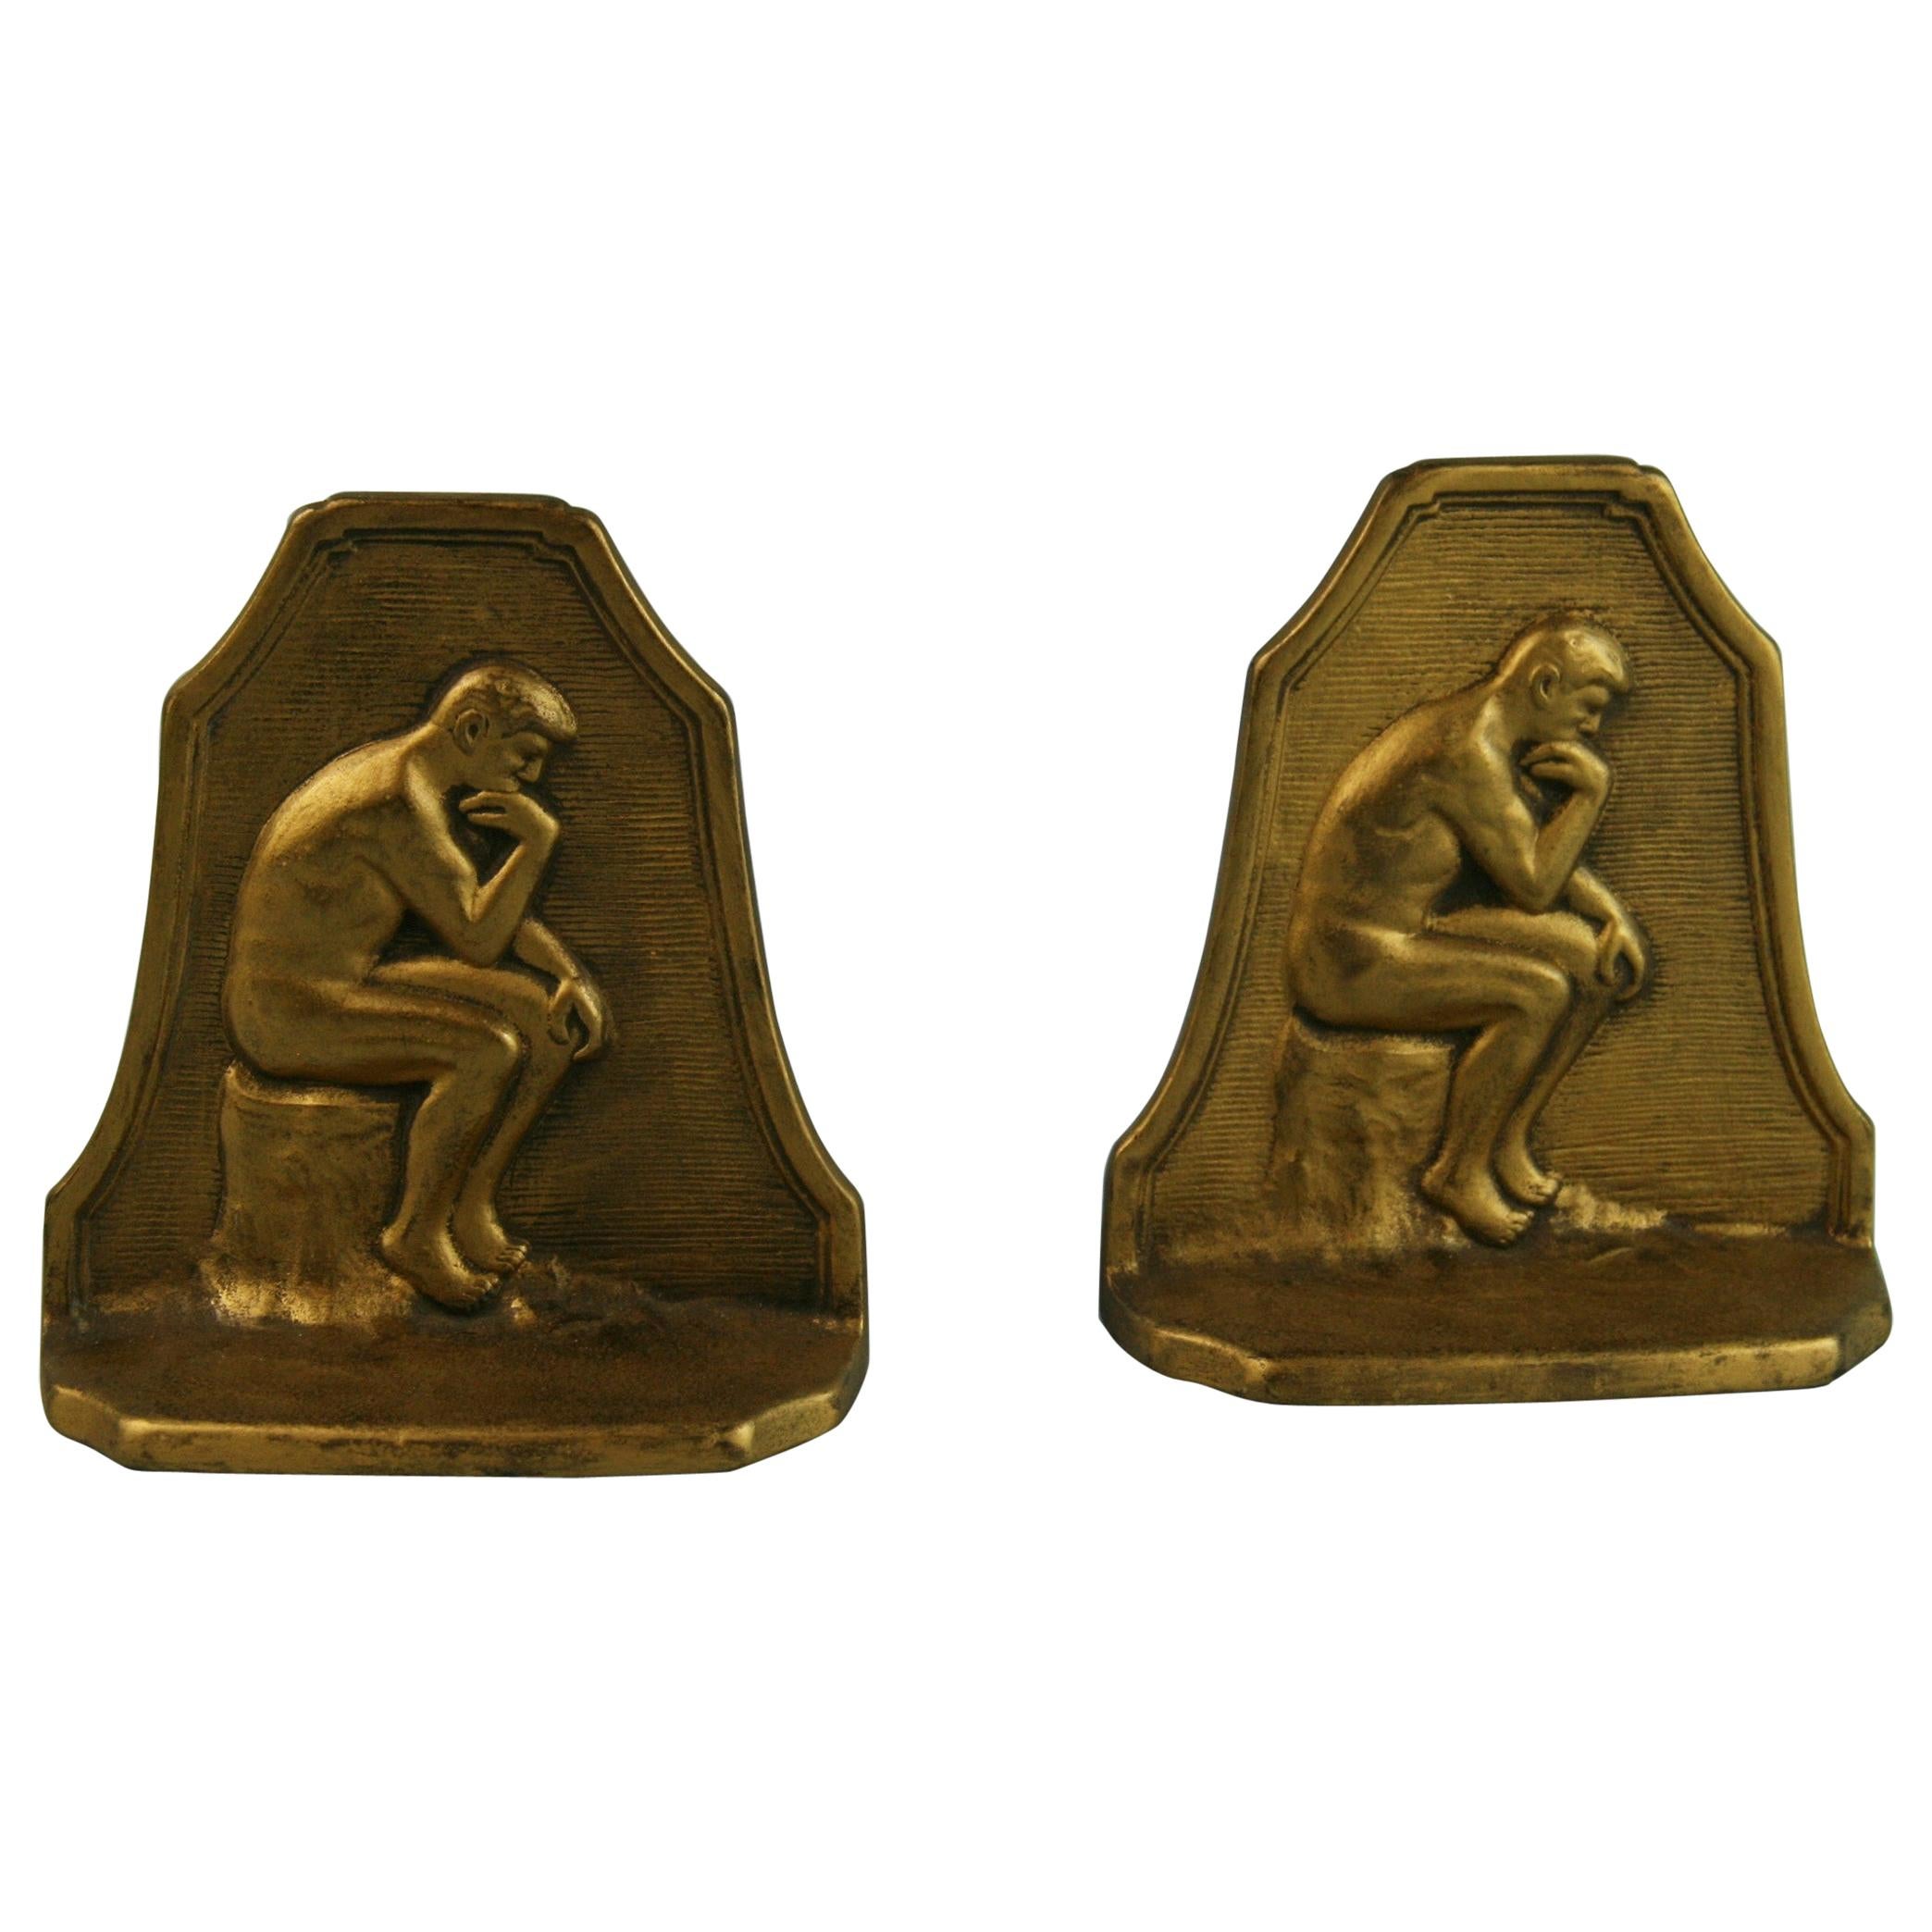 Pair of Caldwell Thinker Bookends, 1929